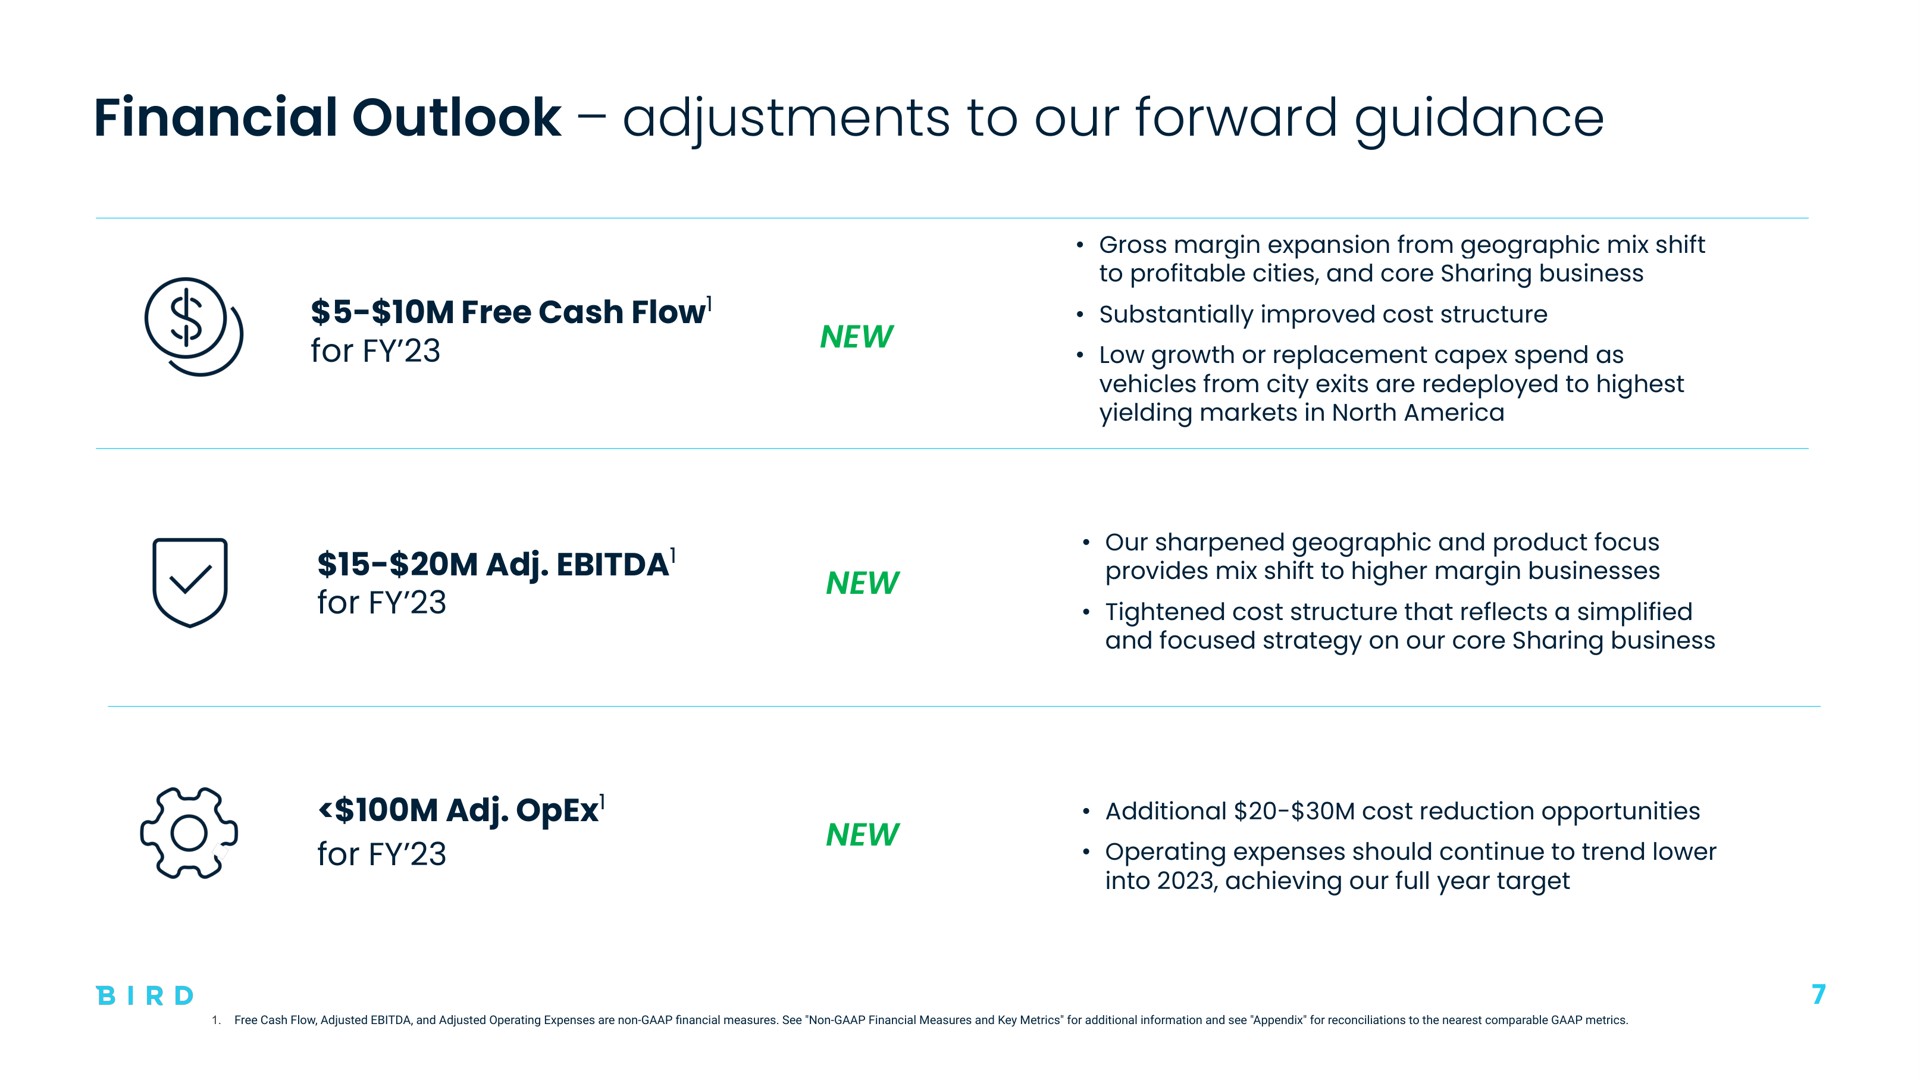 financial outlook adjustments to our forward guidance | Bird